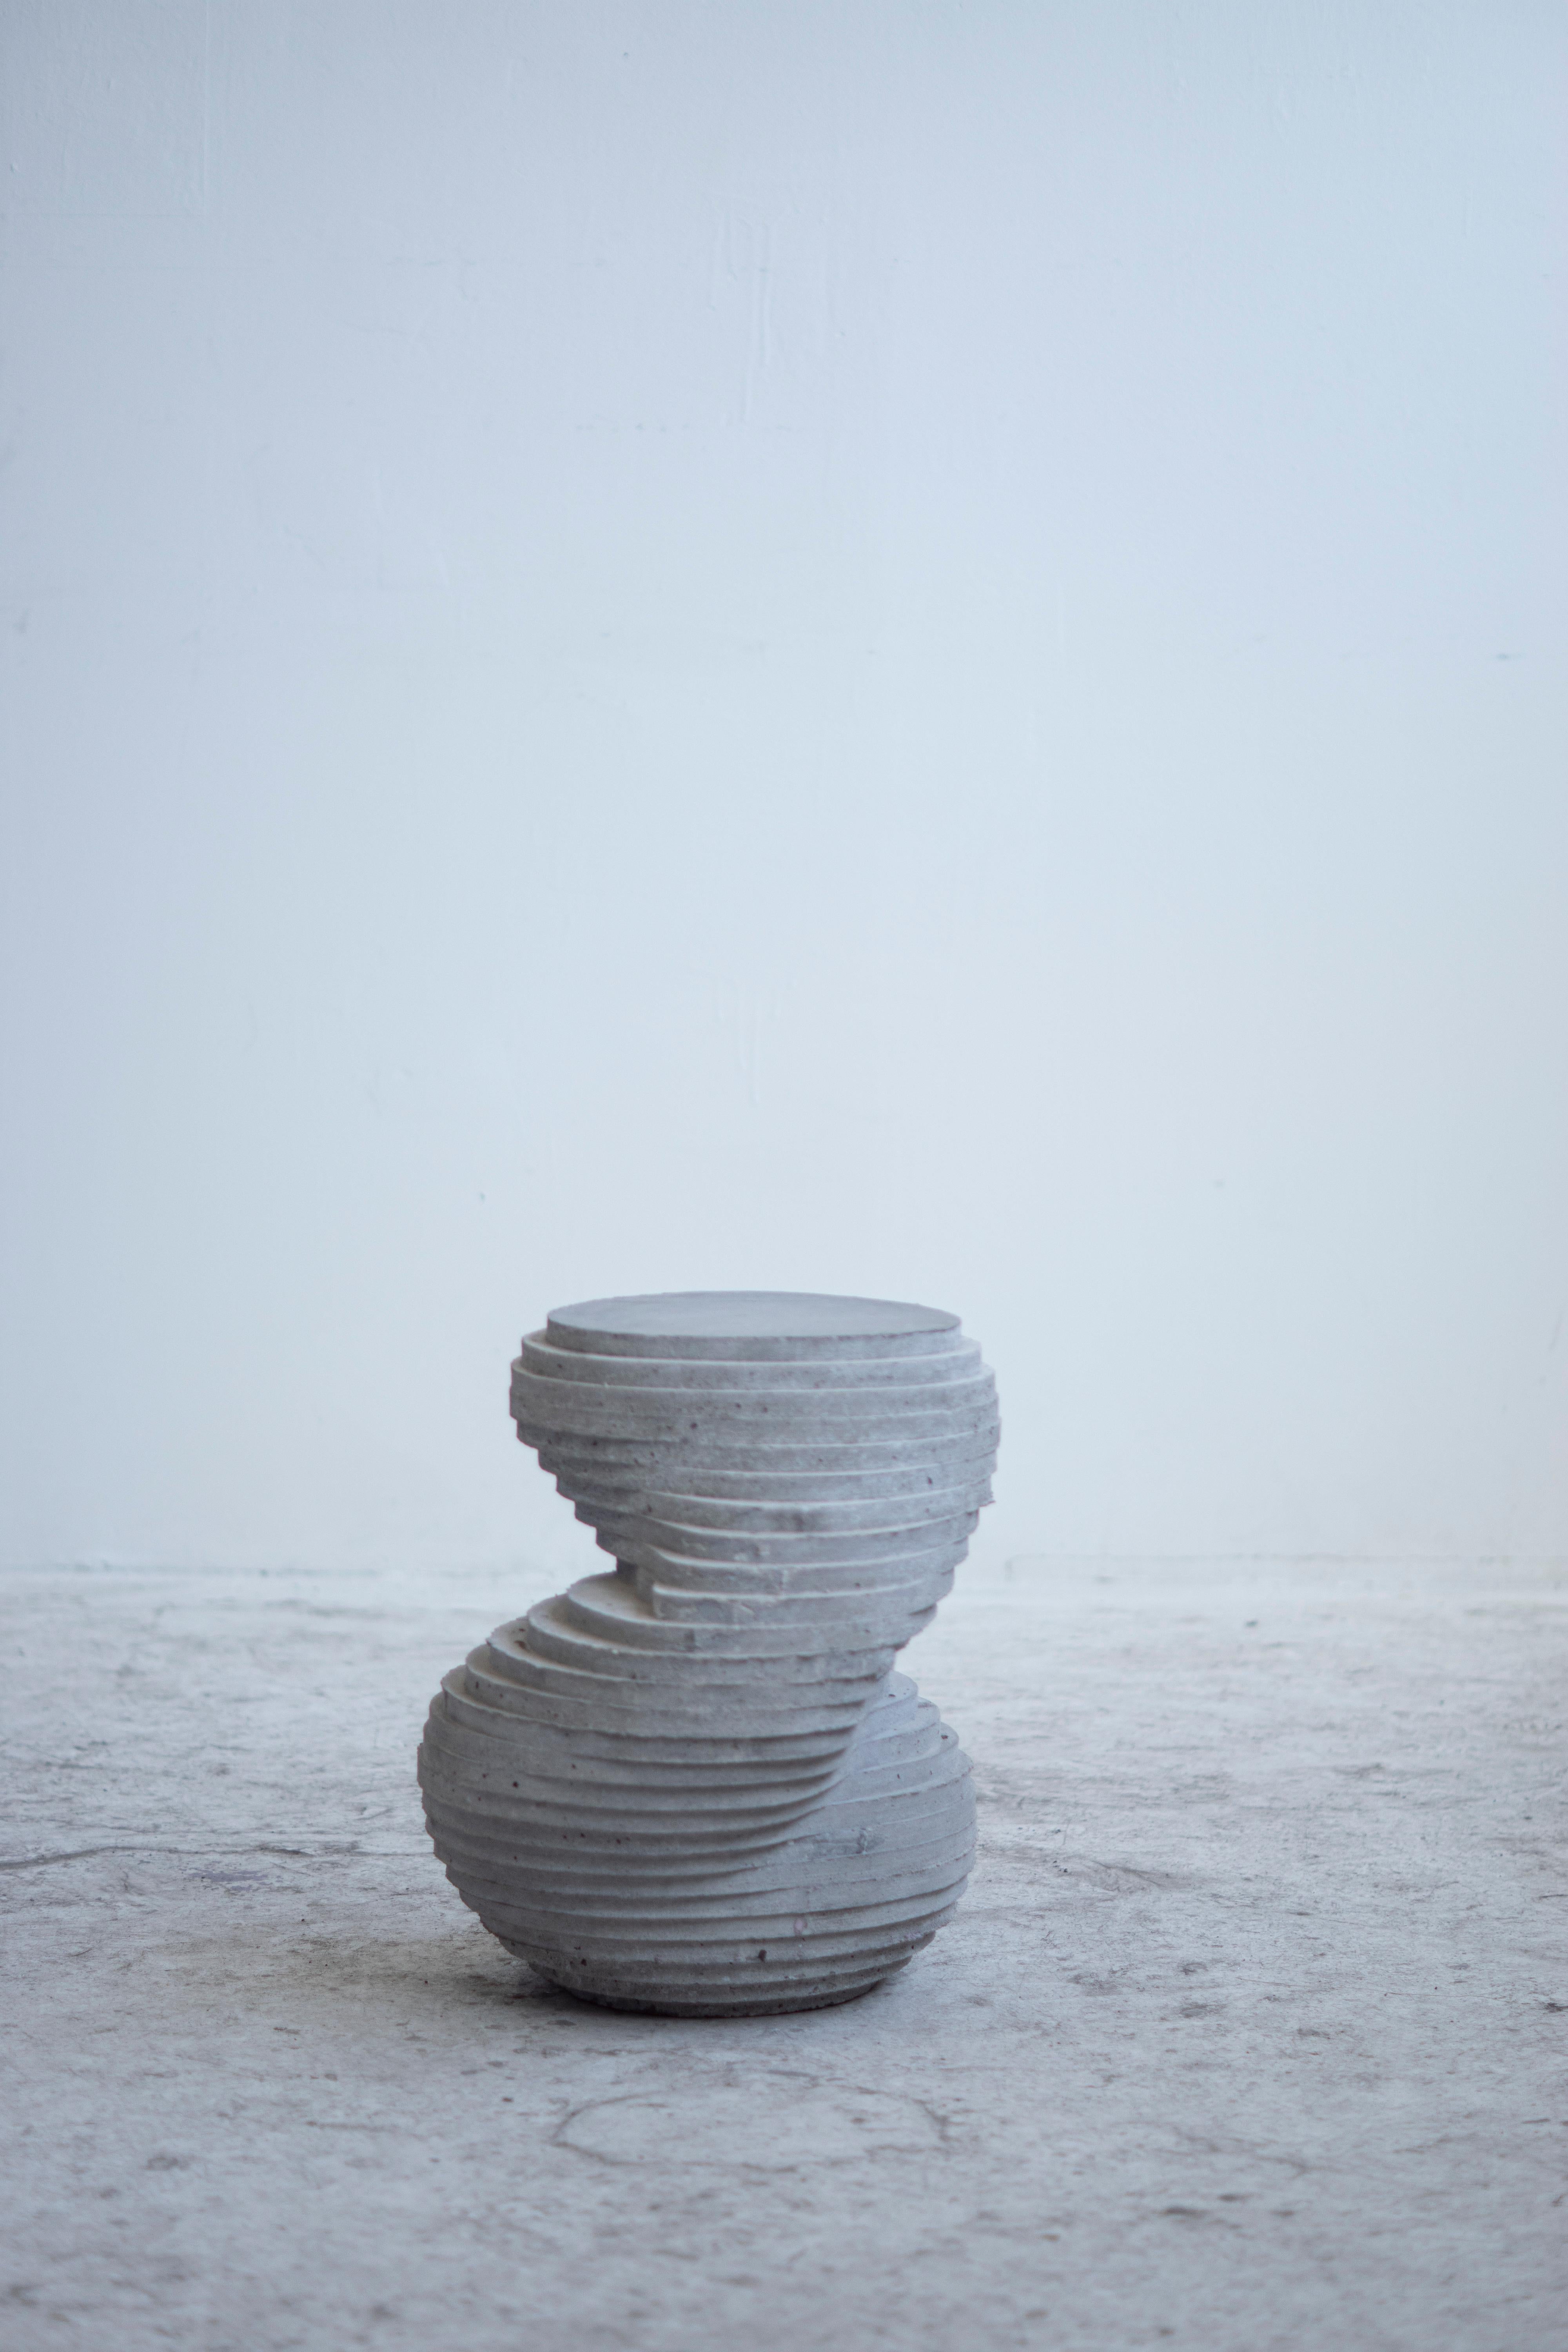 Hand-cast stool that can be used for seating, as a side table or as a sculptural object. For indoor and outdoor use.

At the intersection of art, craft, and design, Concrete Poetics' debut collection of hand-cast cement sculptural furniture and